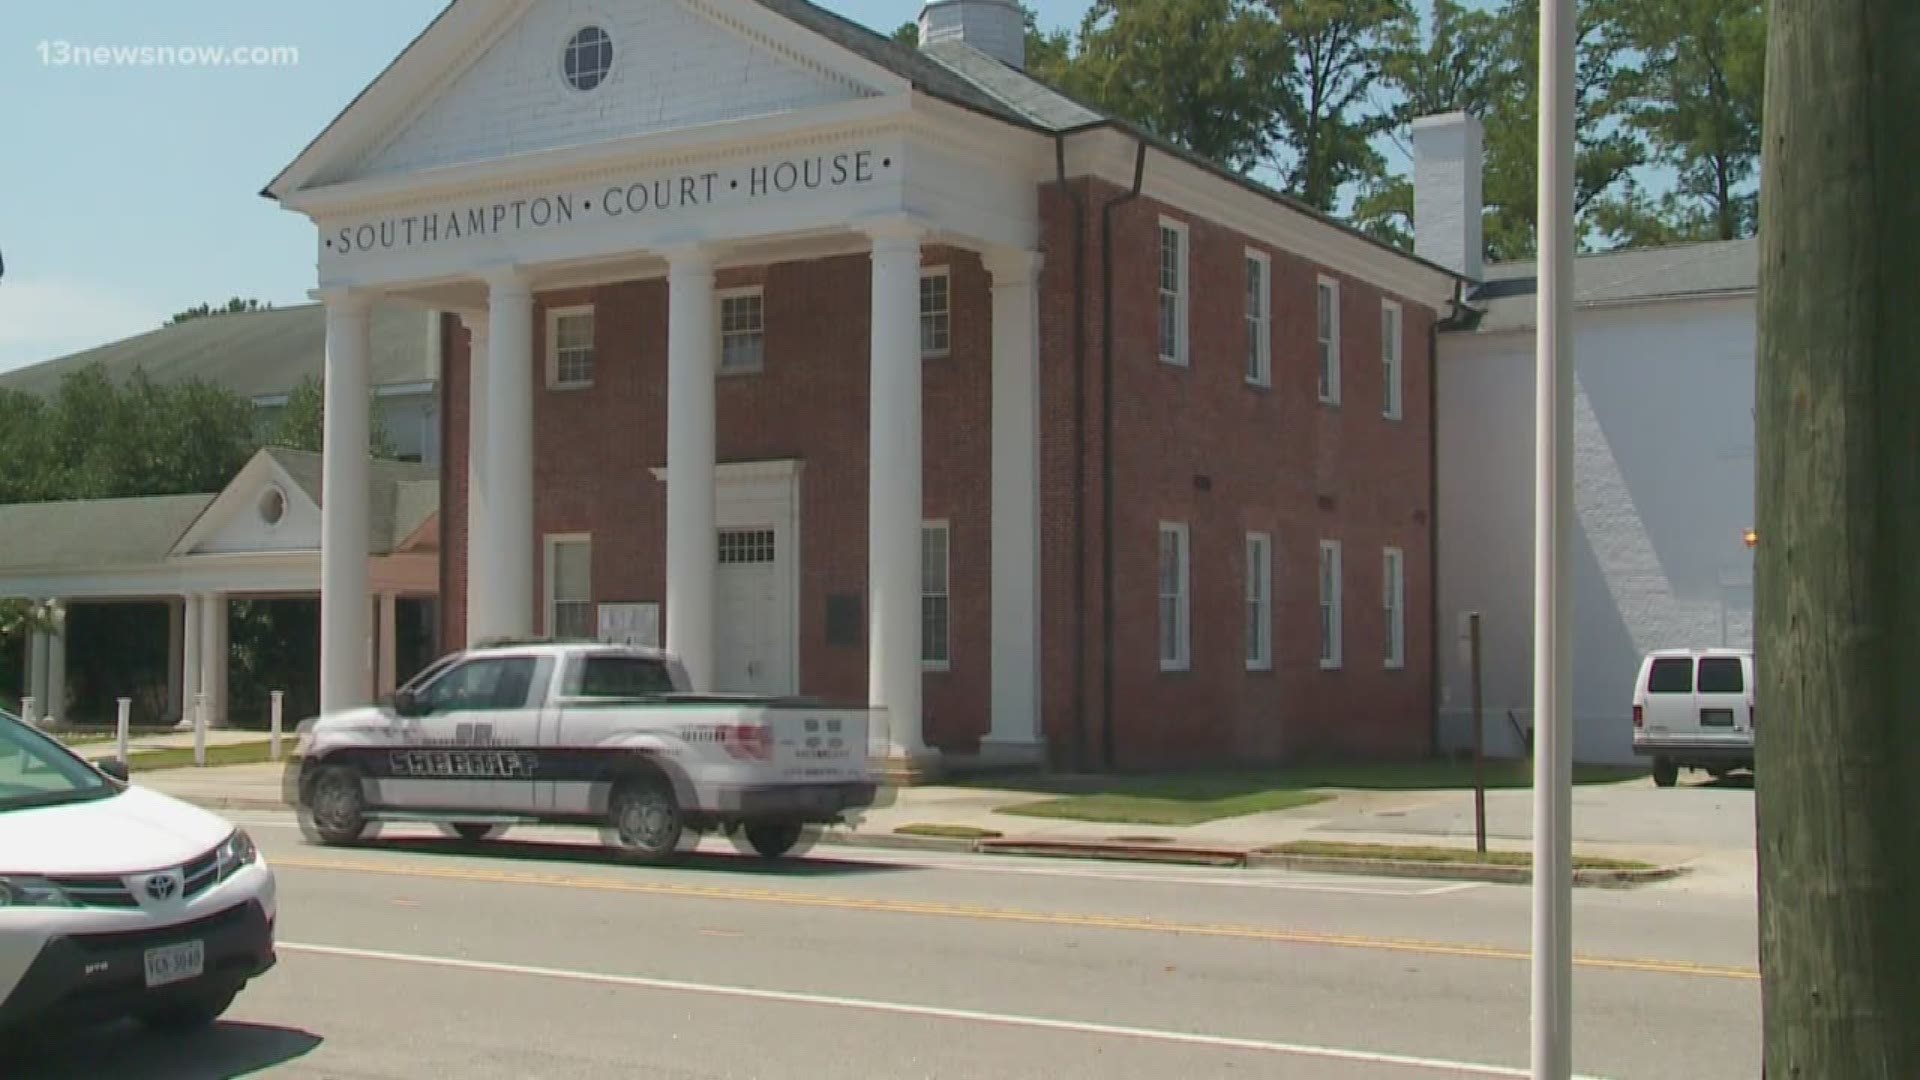 A man is dead after a truck hit him outside the Southampton County Courthouse. The truck driver did stay on the scene.